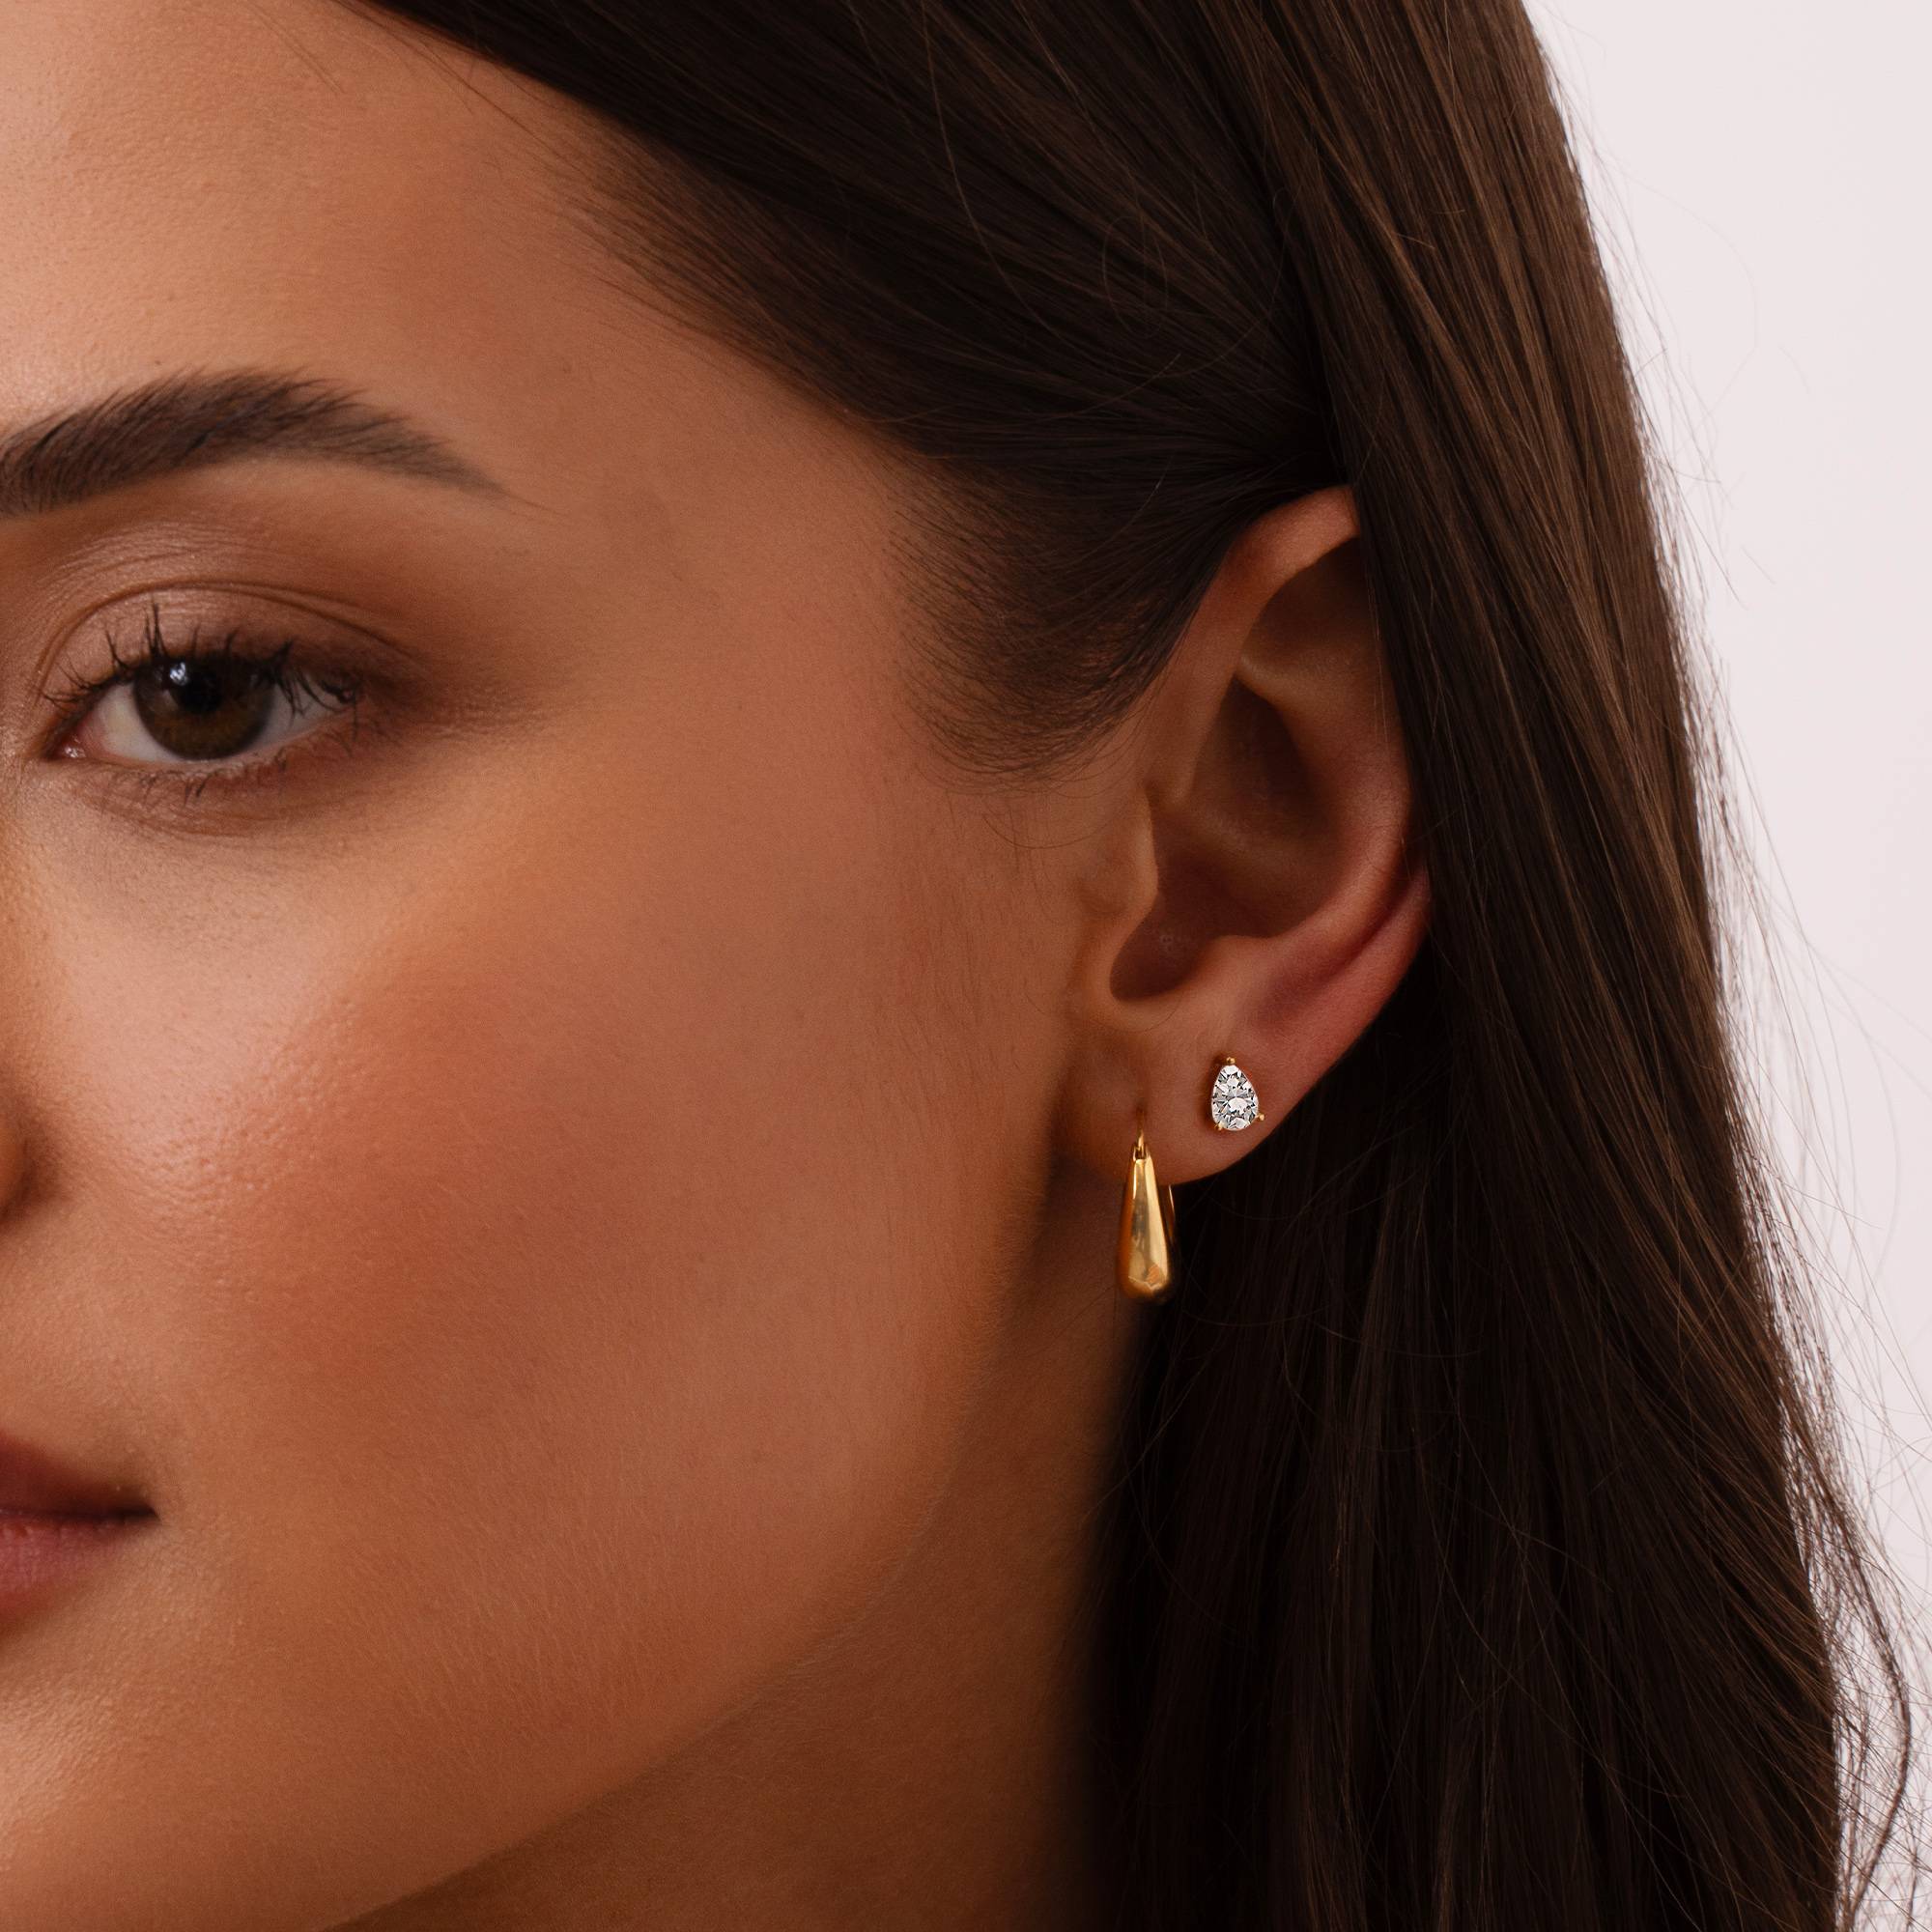 Raquel Triangle Stud Earrings in 18K Gold Plating-4 product photo